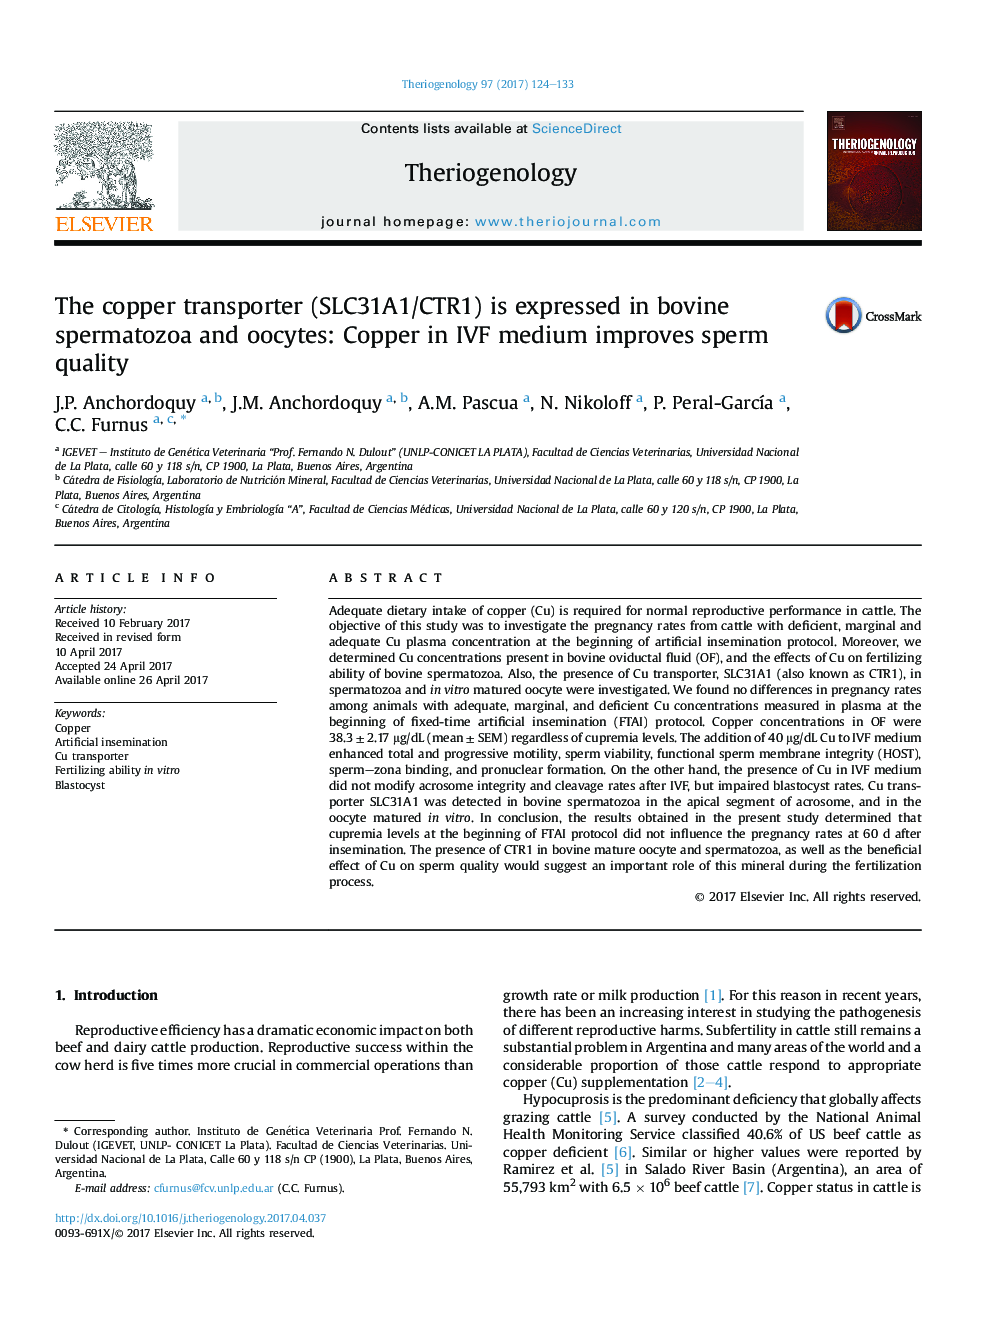 The copper transporter (SLC31A1/CTR1) is expressed in bovine spermatozoa and oocytes: Copper in IVF medium improves sperm quality